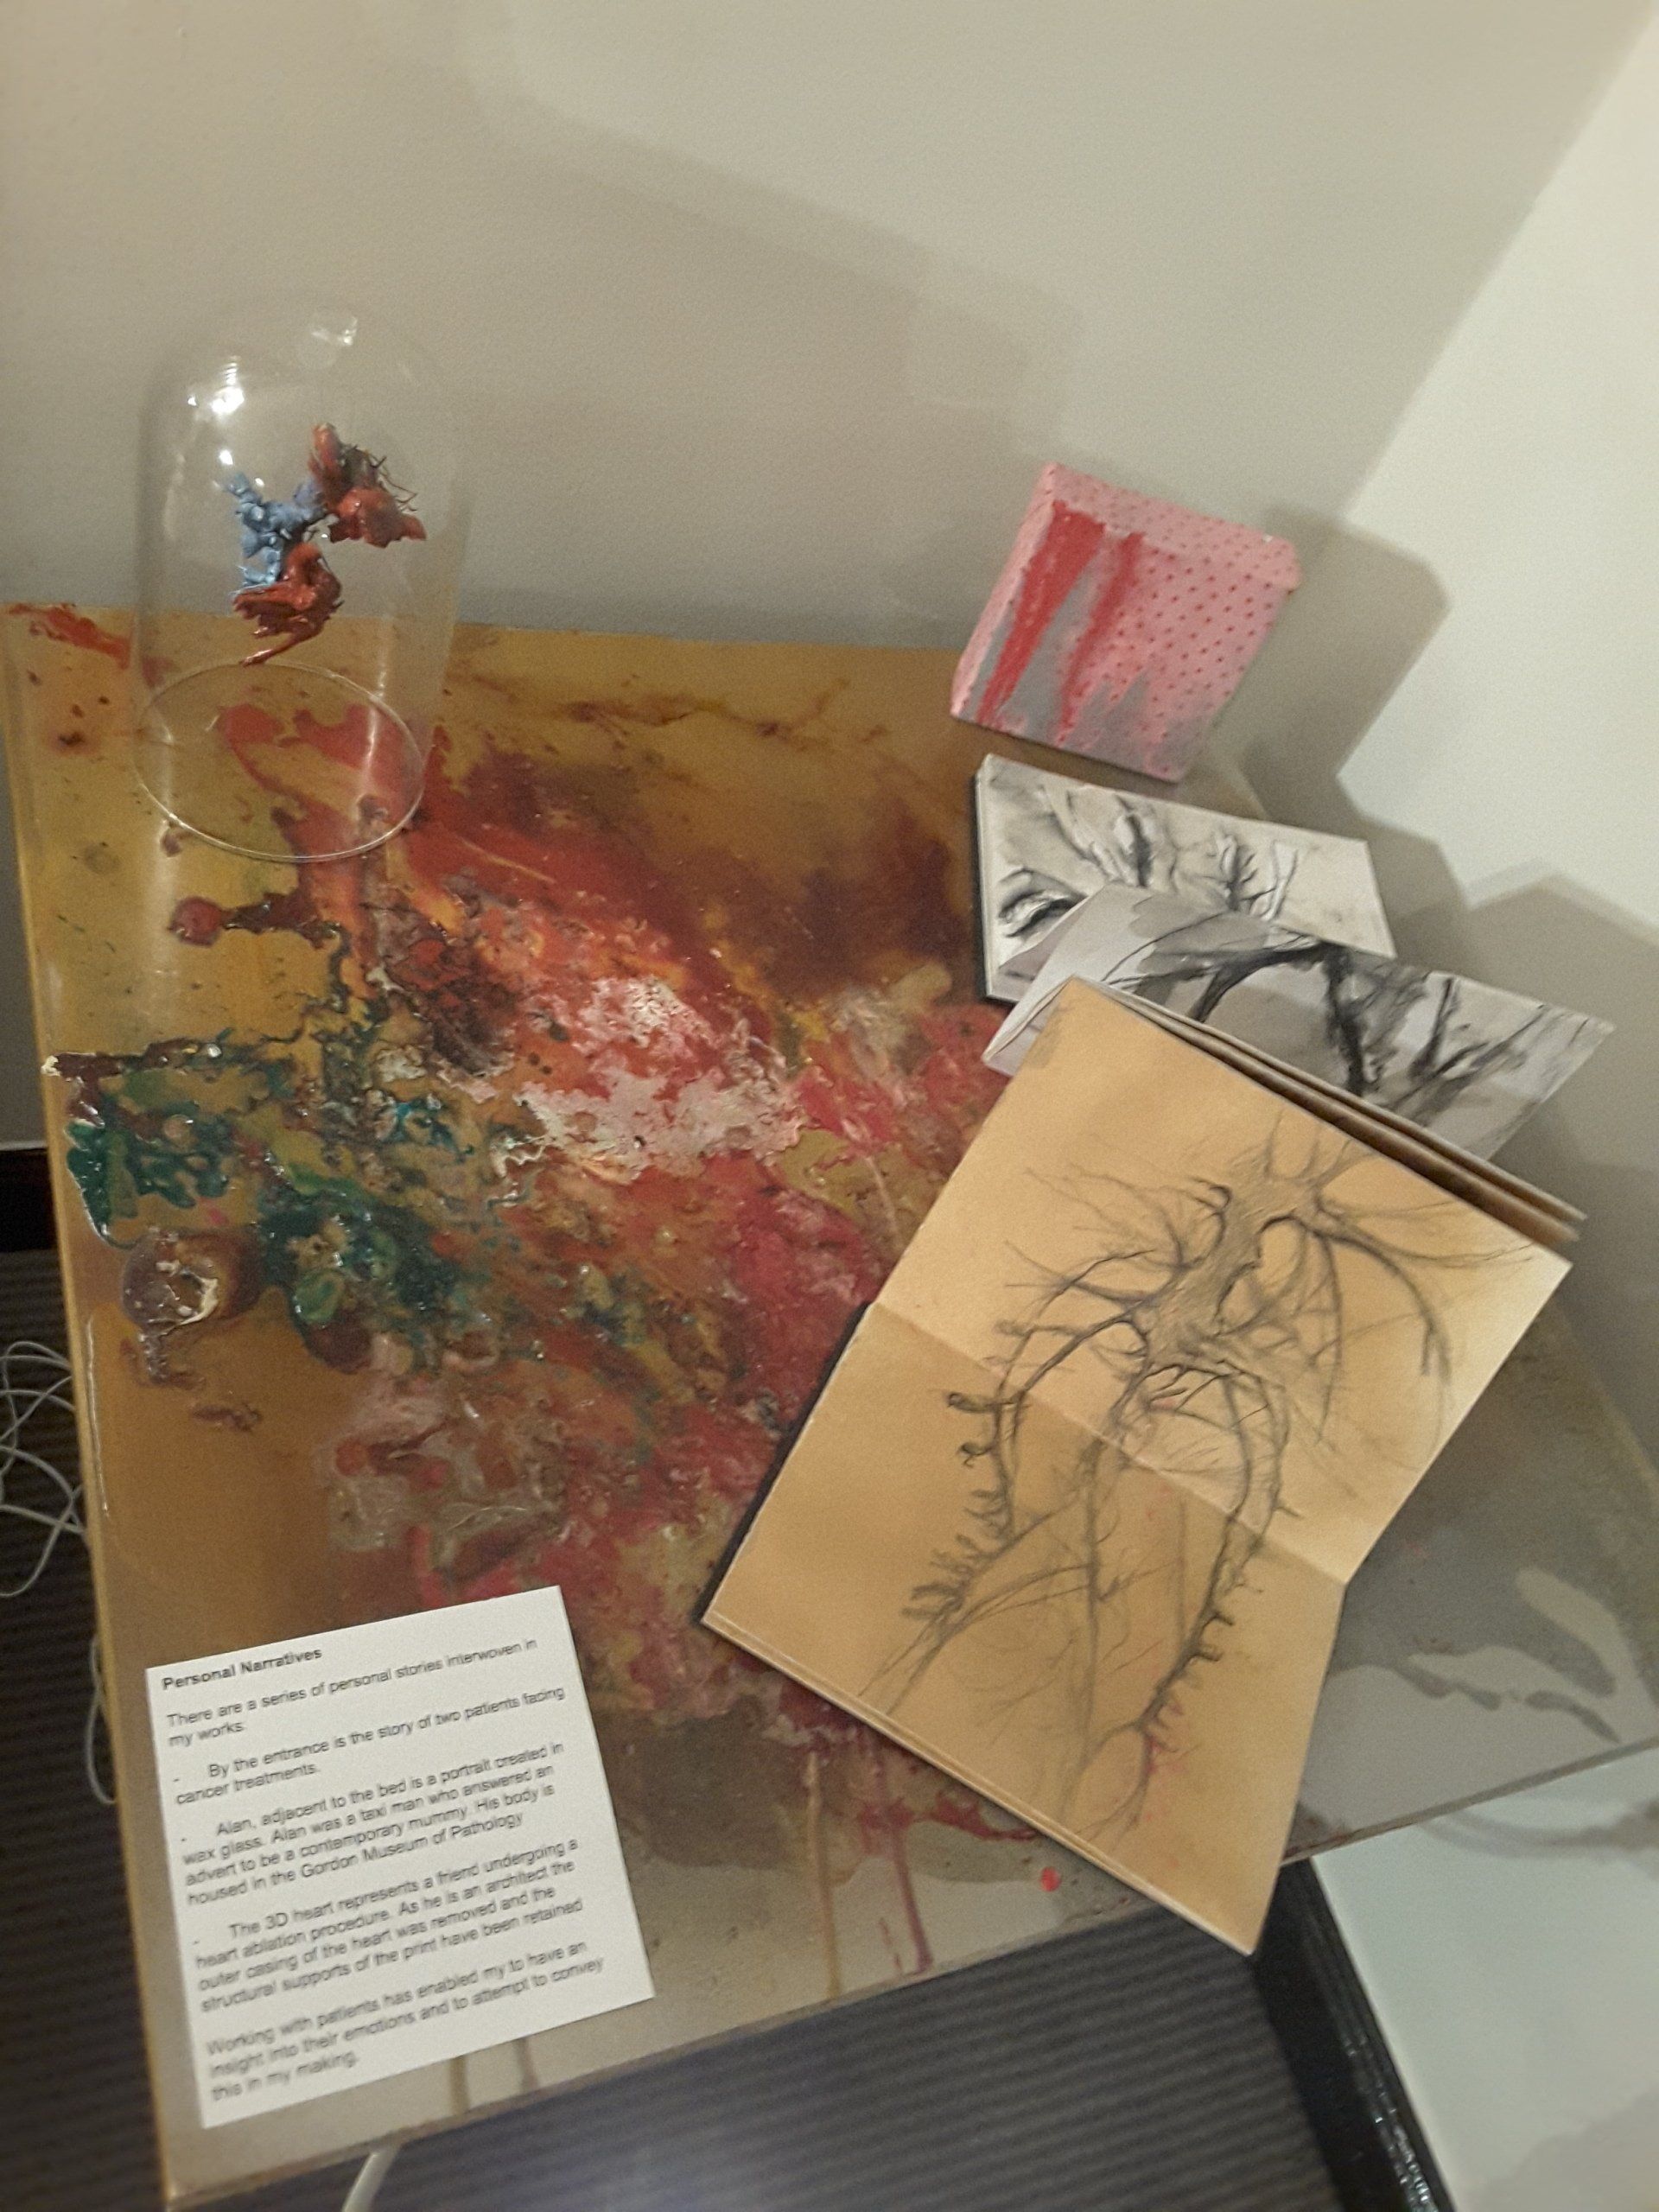 Table with selection of hand drawn studies of veins and arteries.